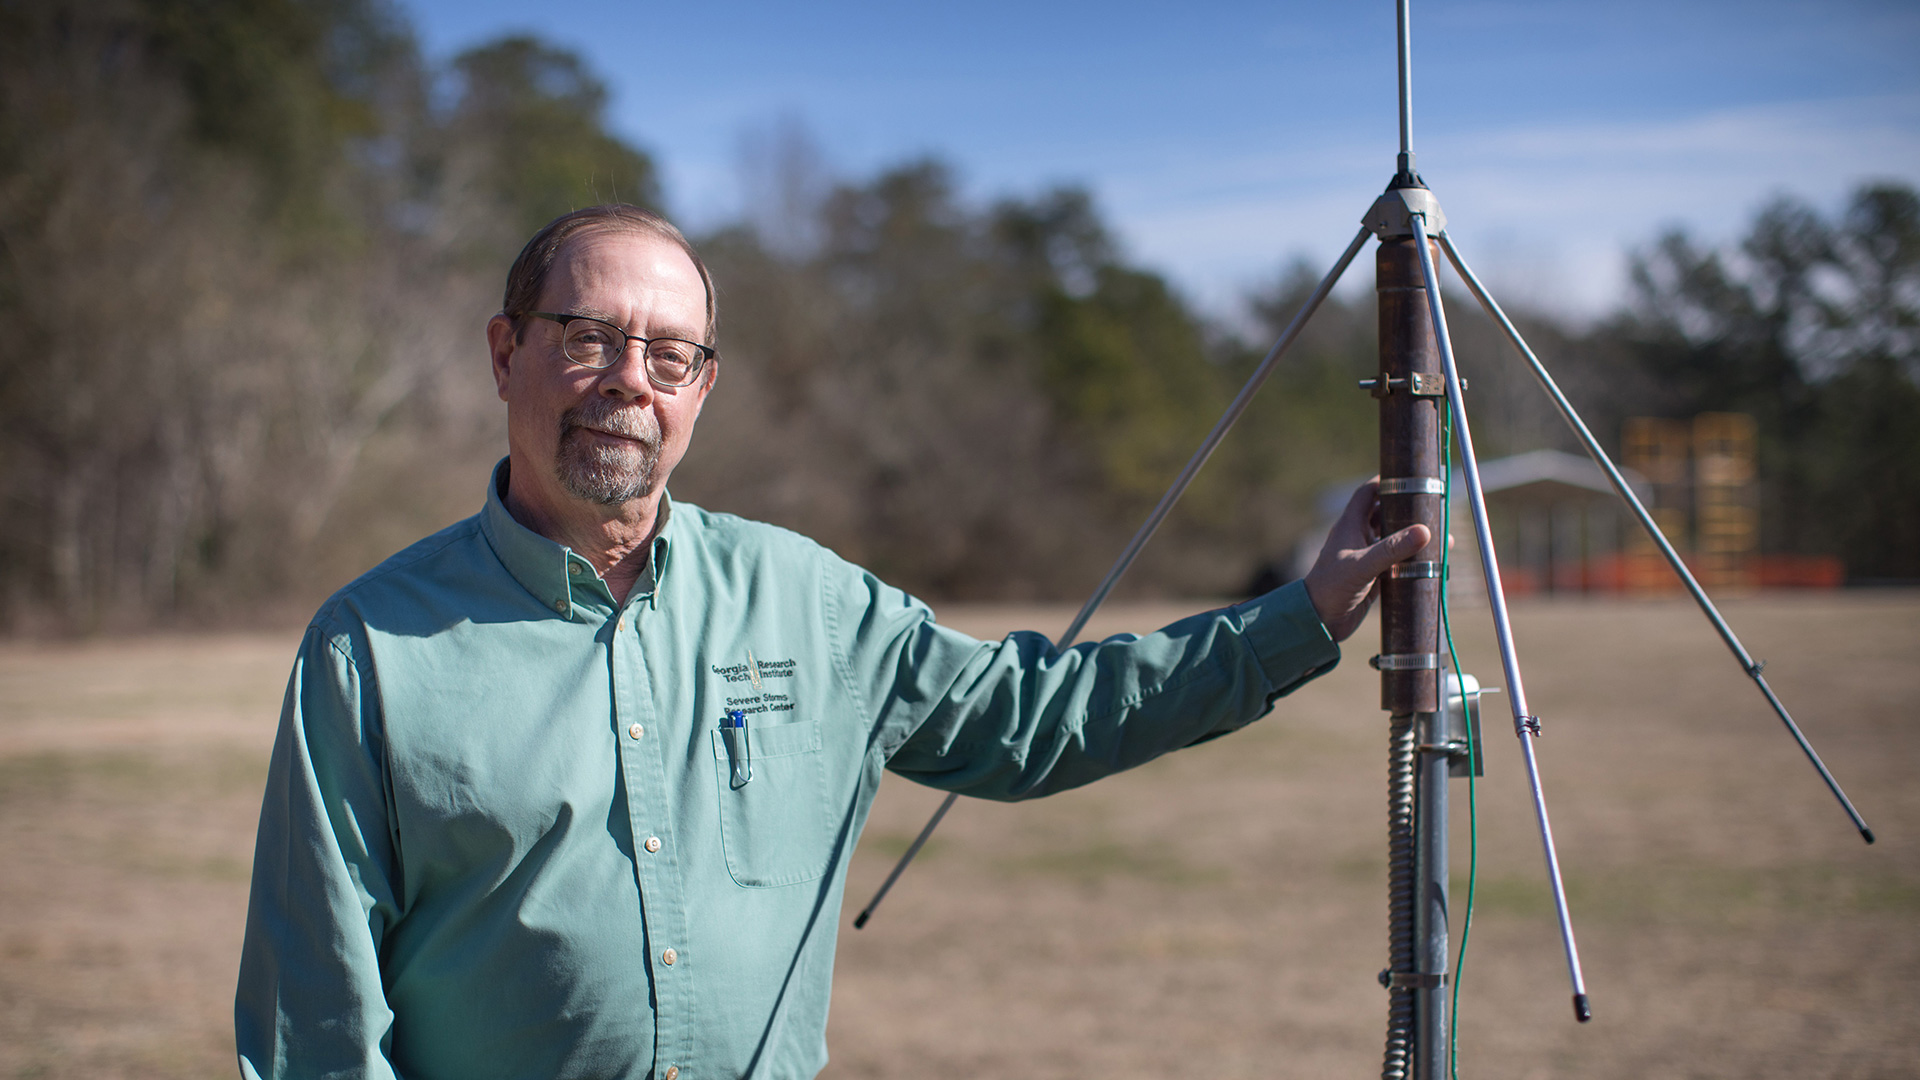 photo: man standing outside in a field, on a crisp Fall day, with hand on weather instrument.